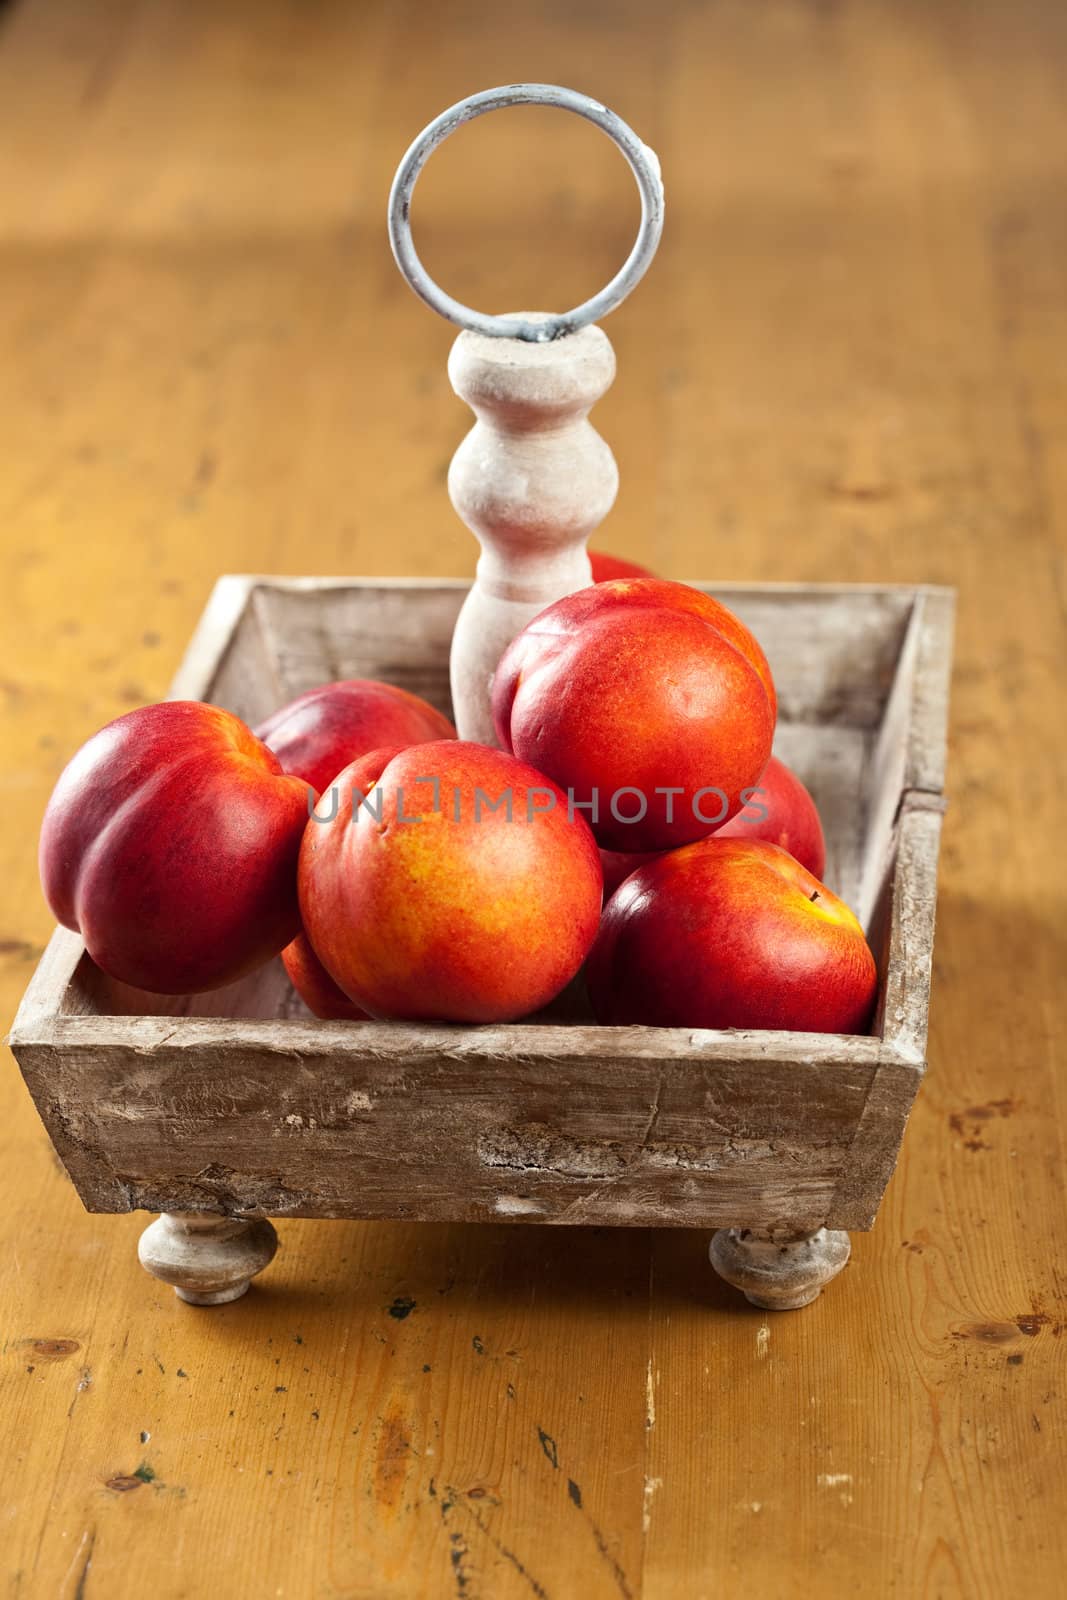 Ripe nectarines waiting to be eaten in a wooden basket